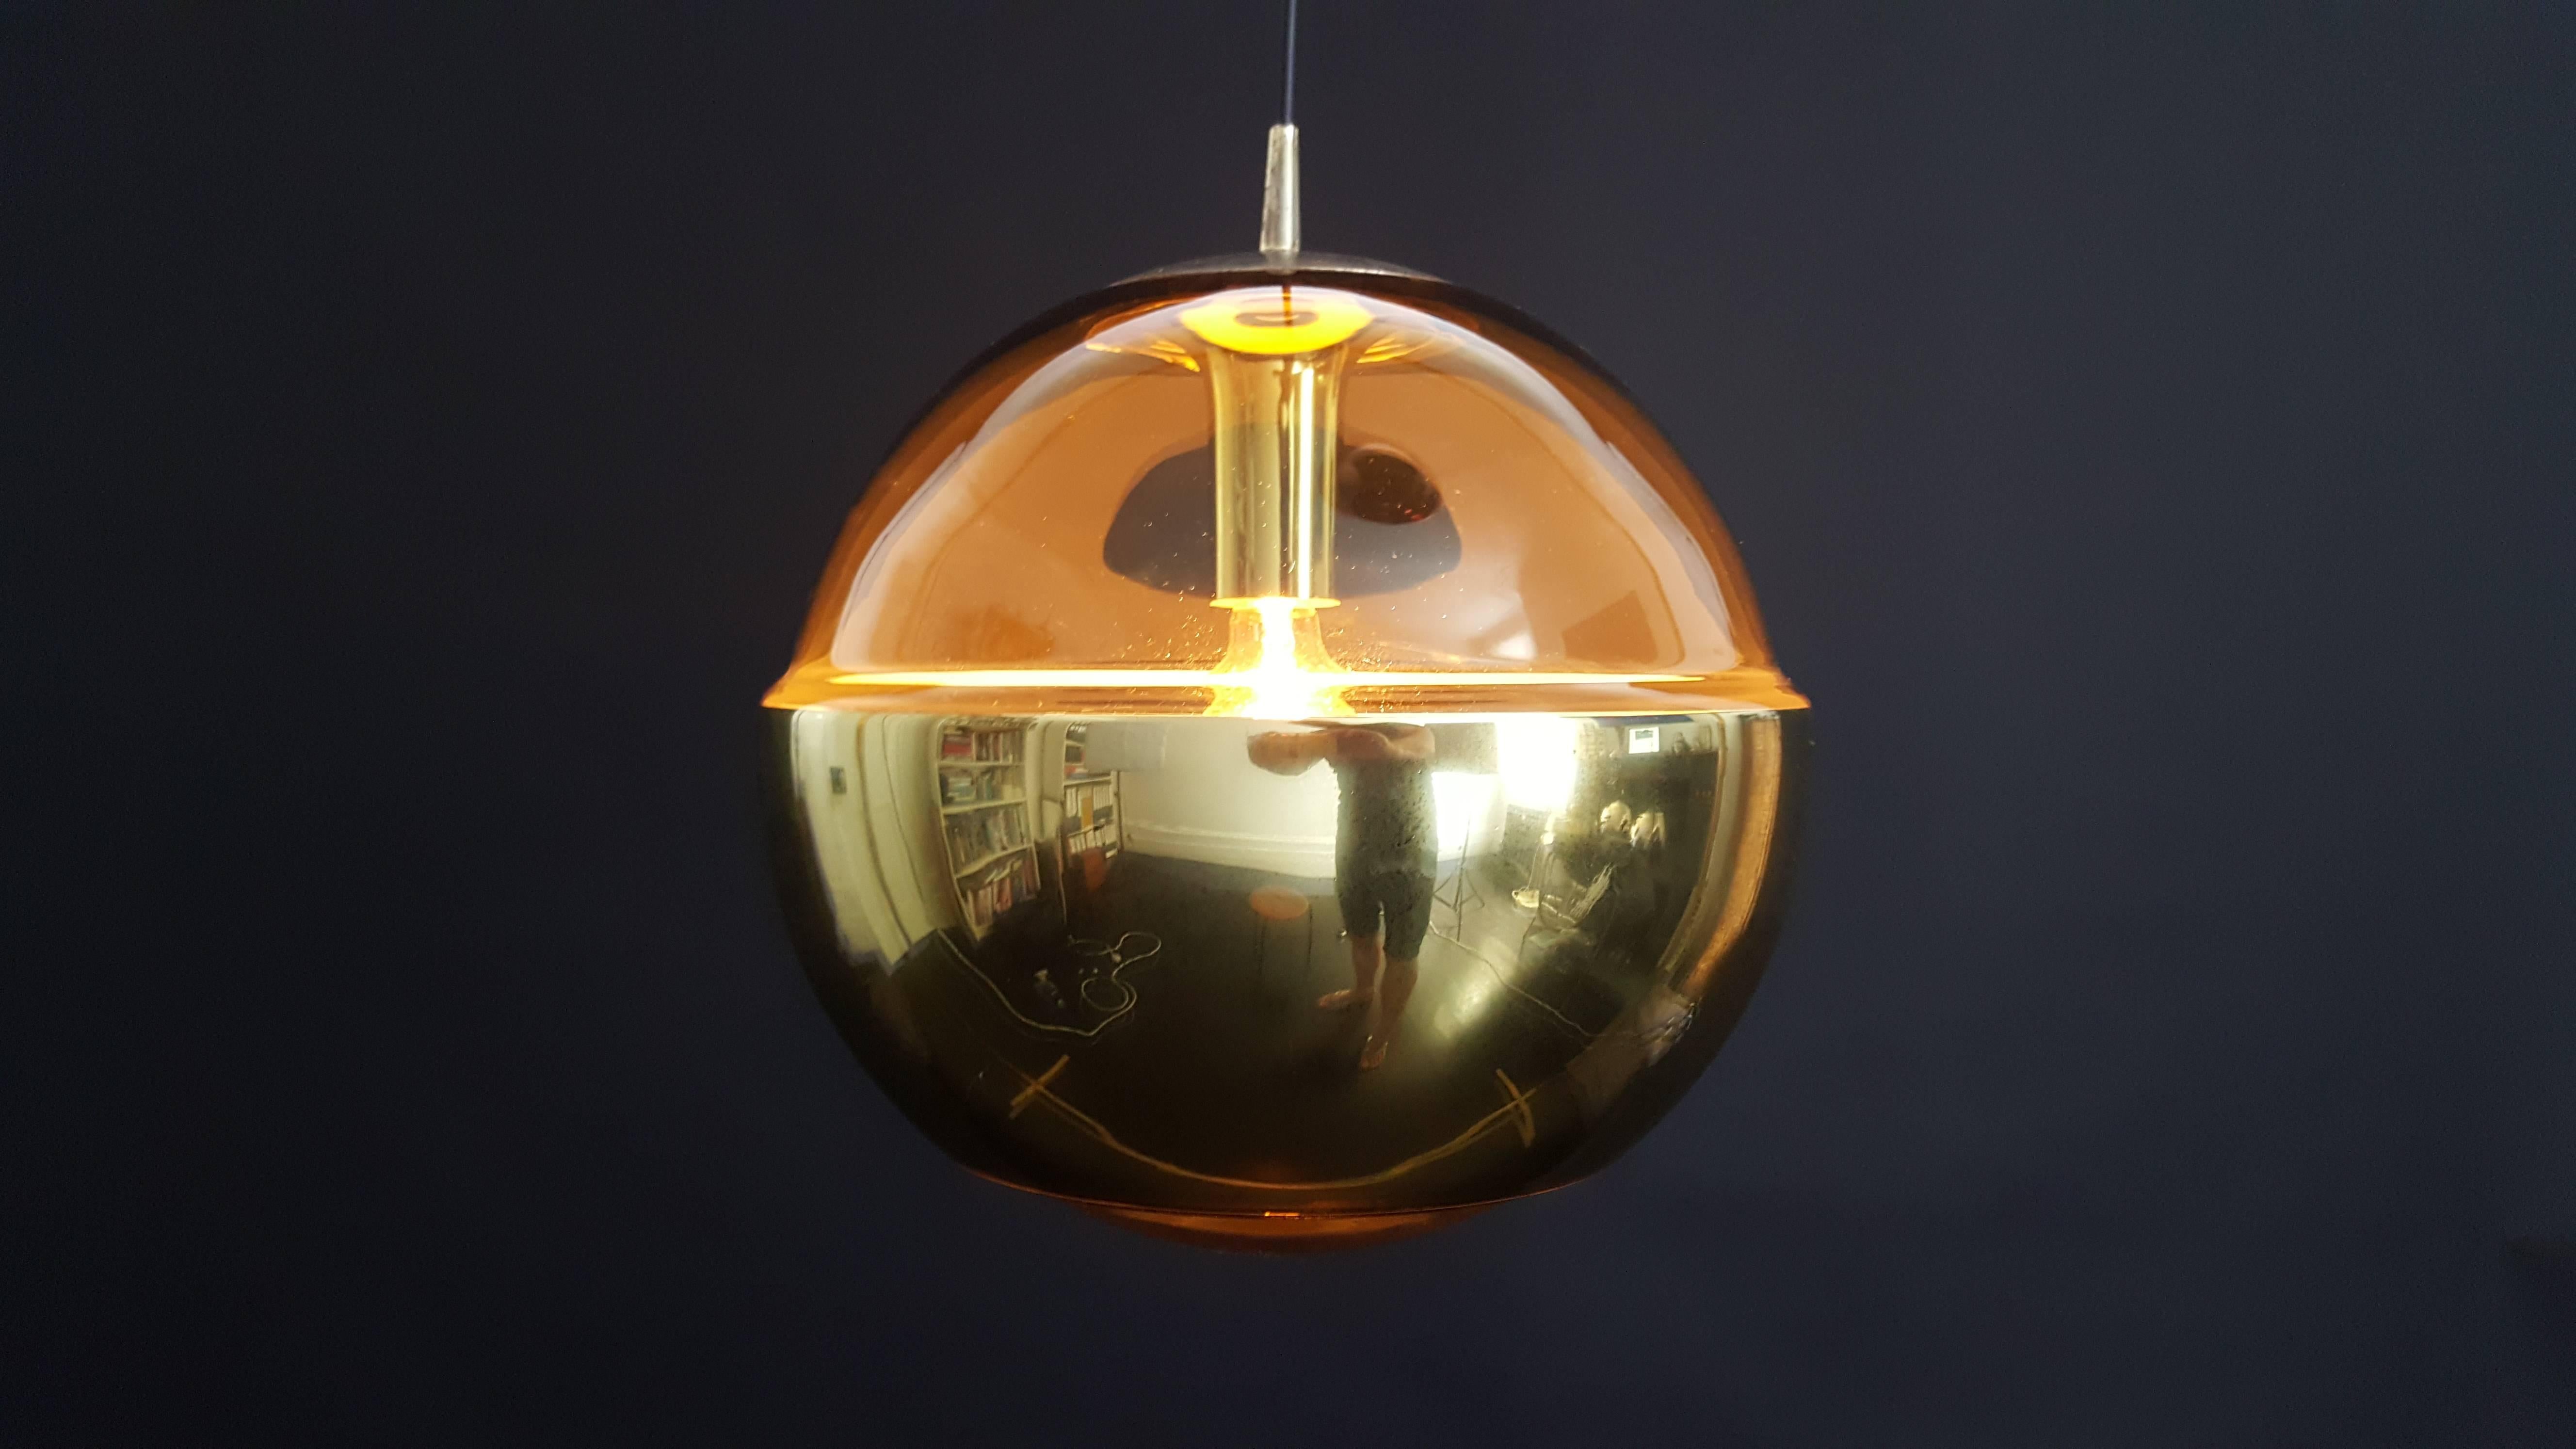 An imposing large Peill and Putzler brassed metal and amber glass spherical ceiling light, great look both lit and unlit.

Fully working, rewired and safety tested and passed - supplied with a new minimal ceiling rose.

Global shipping available.